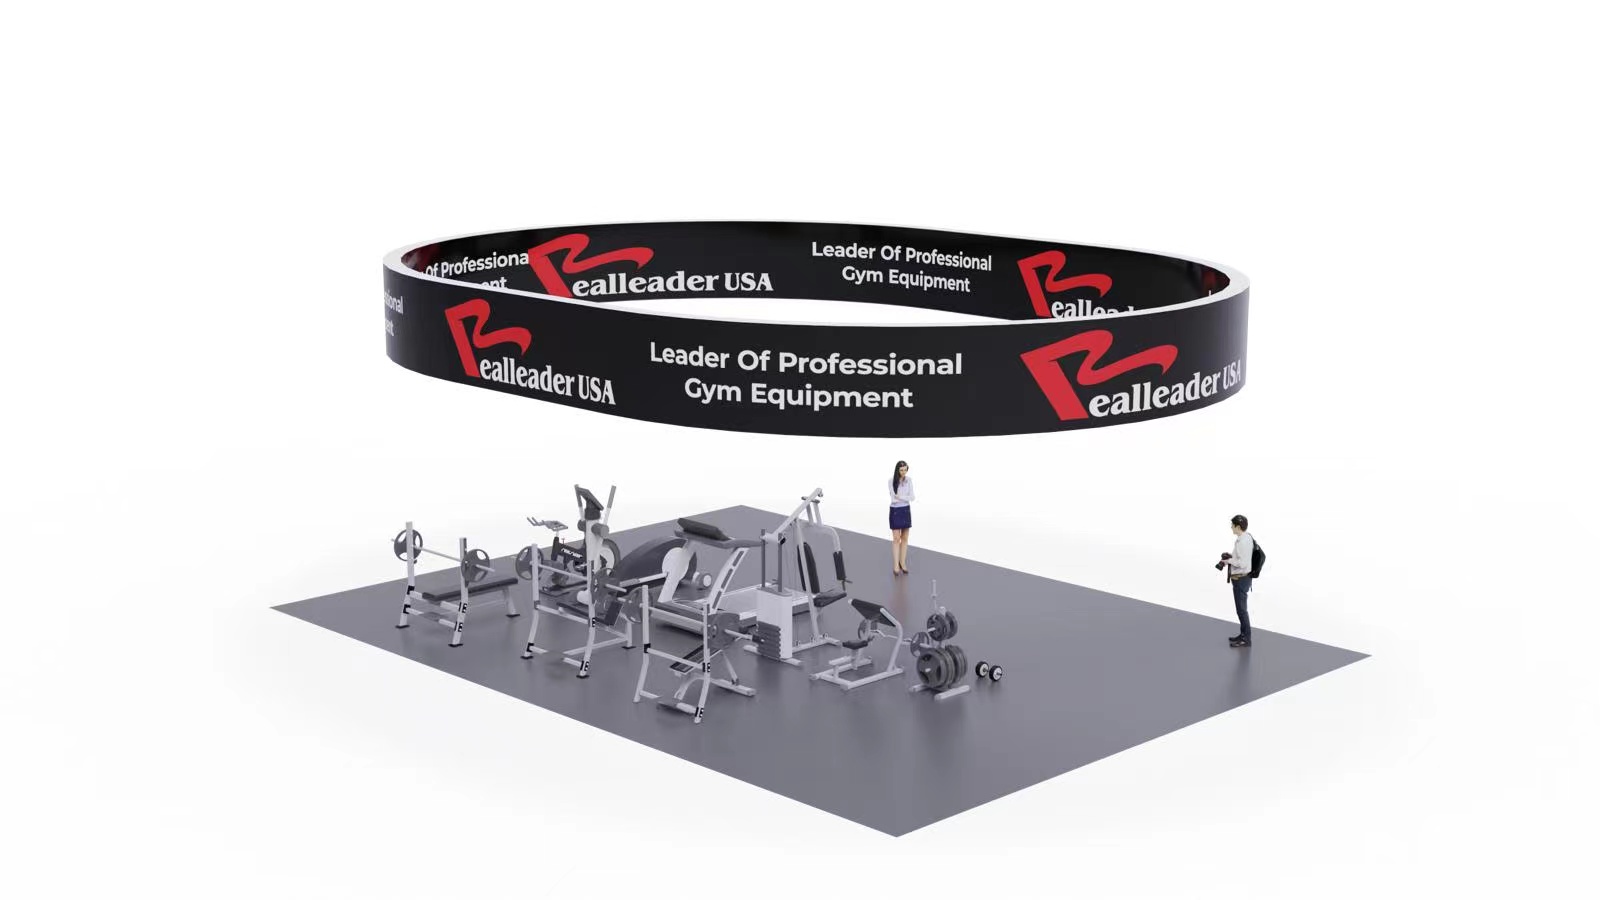 Come to Visit Realleader Booth NO1124 In IHRSA from 20th to 22th March